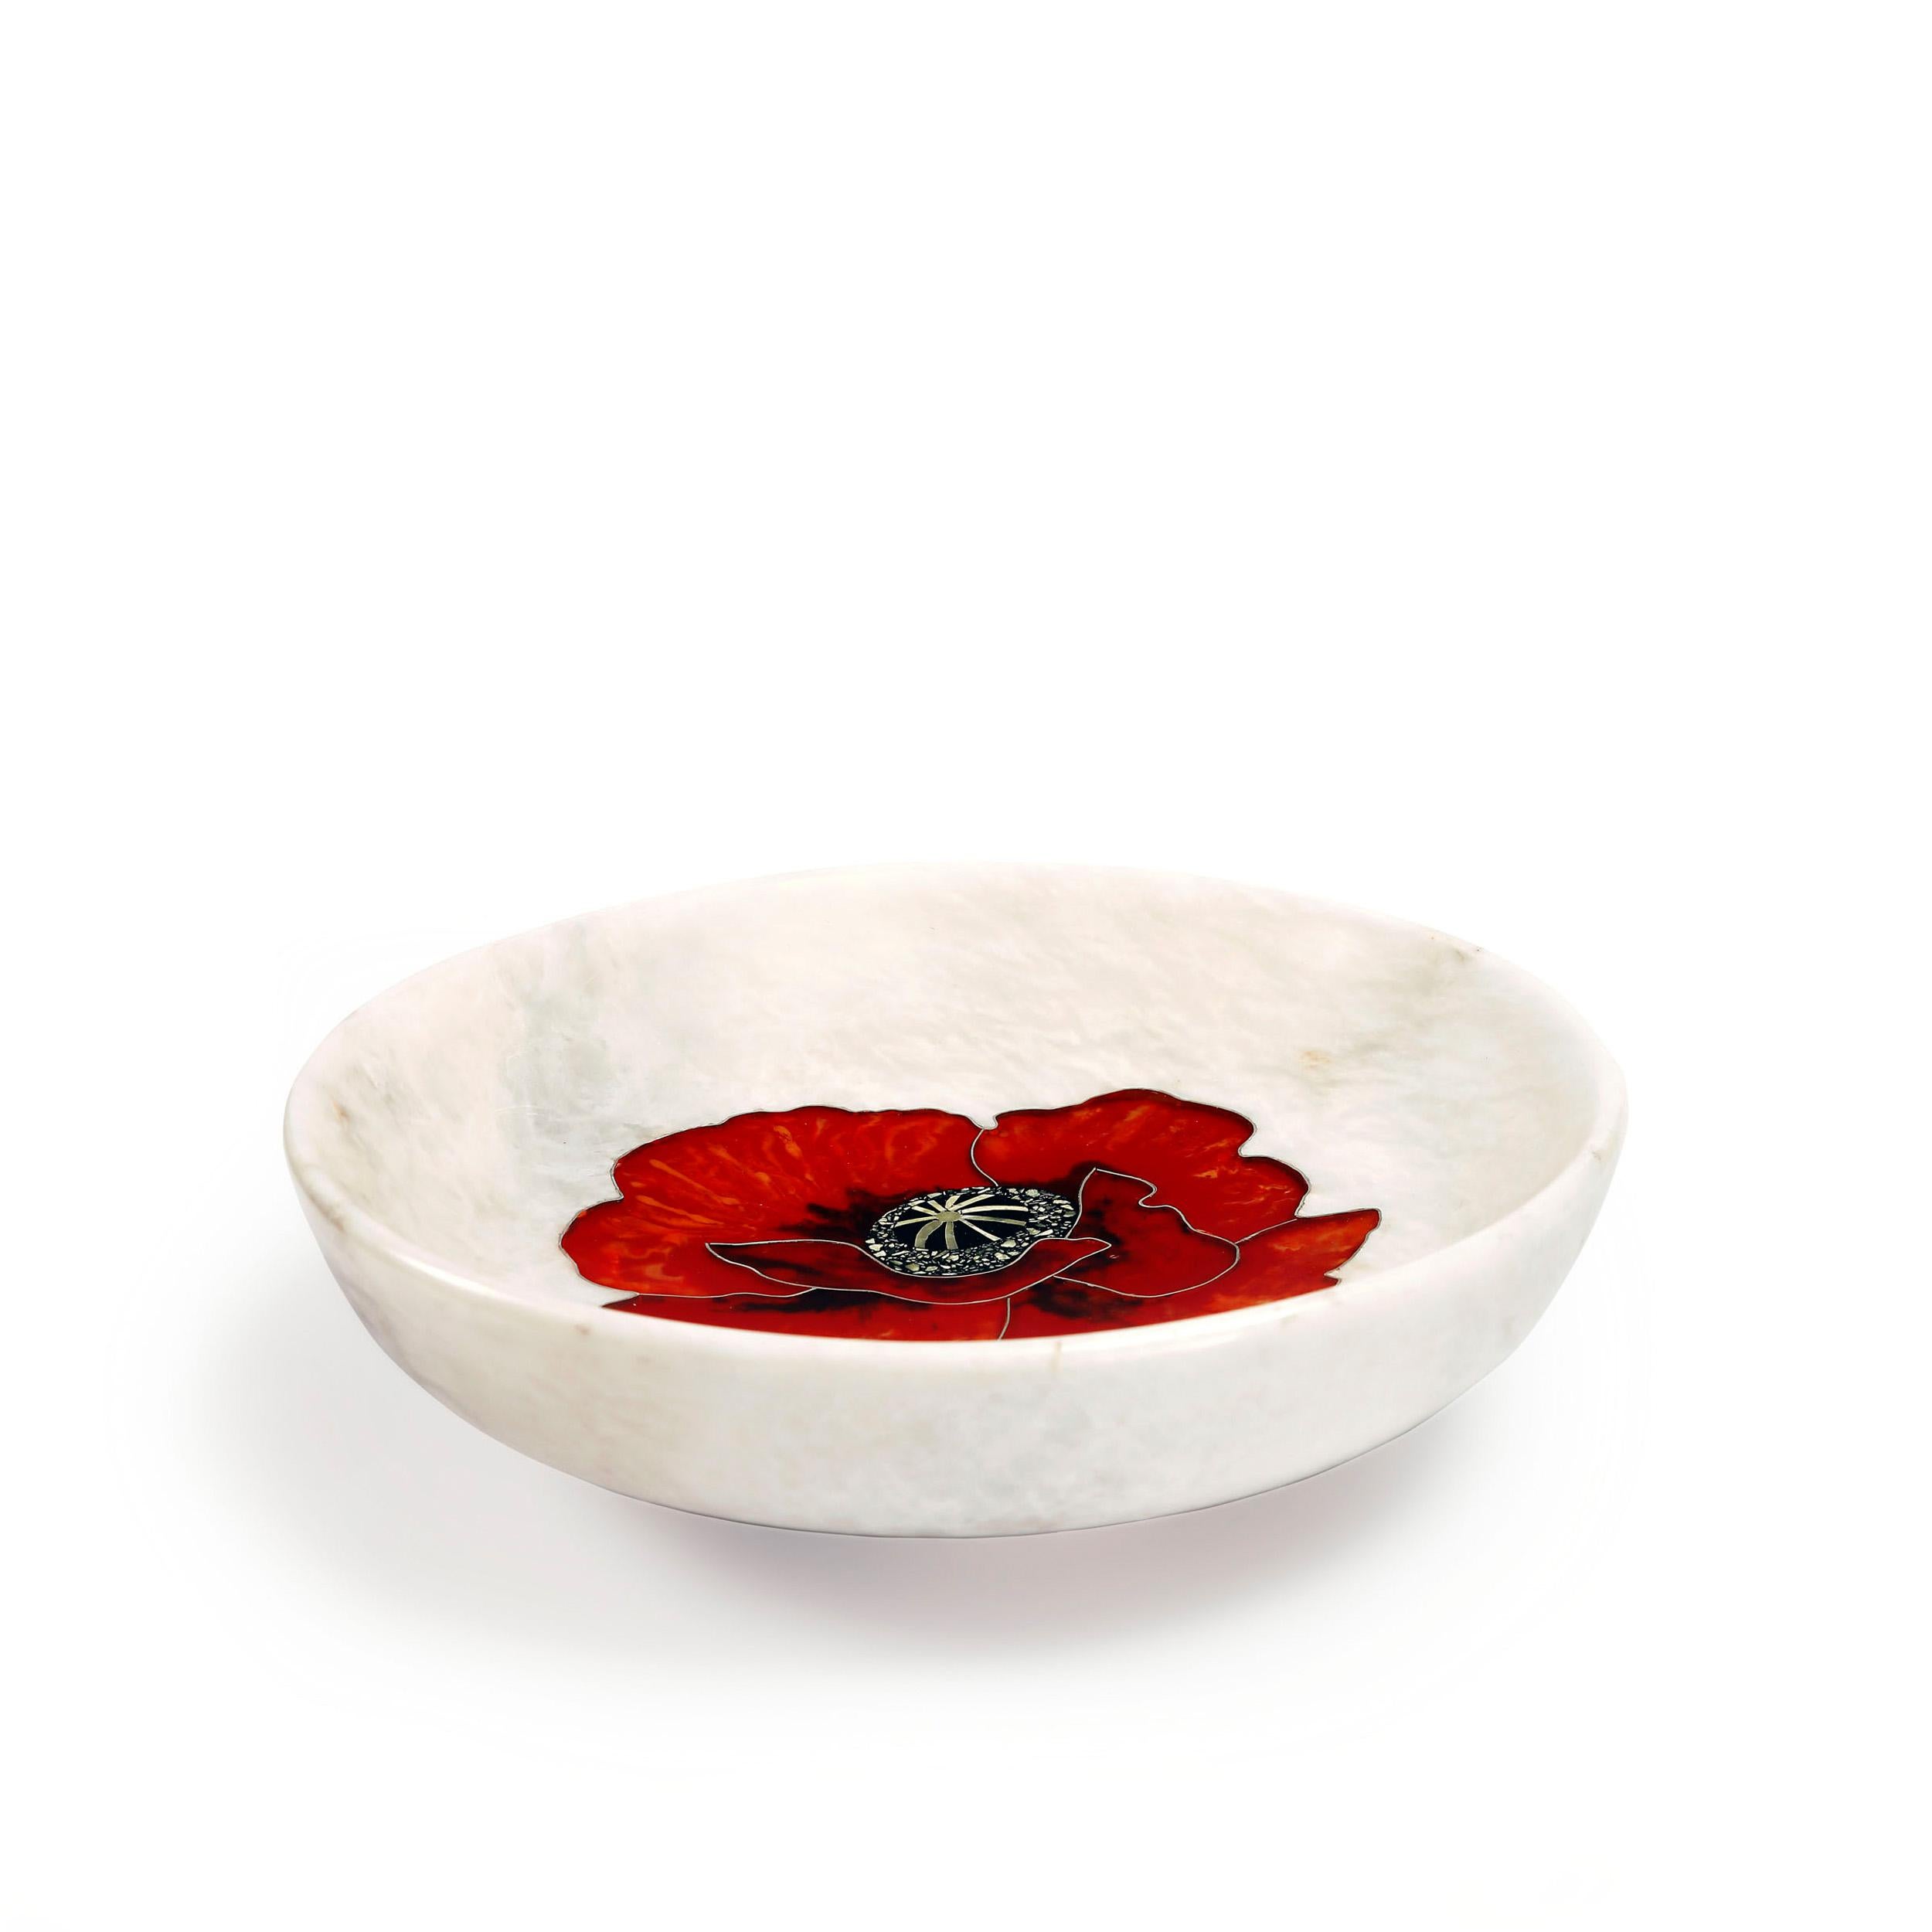 Reidi Bowl by Studio Lel
Dimensions: D25x W25 x H8 cm
Materials: Serpentine, resin, marble

The Reidi Collection takes its name from the Persian word for the poppy flower - marrying traditional craft techniques with contemporary design and